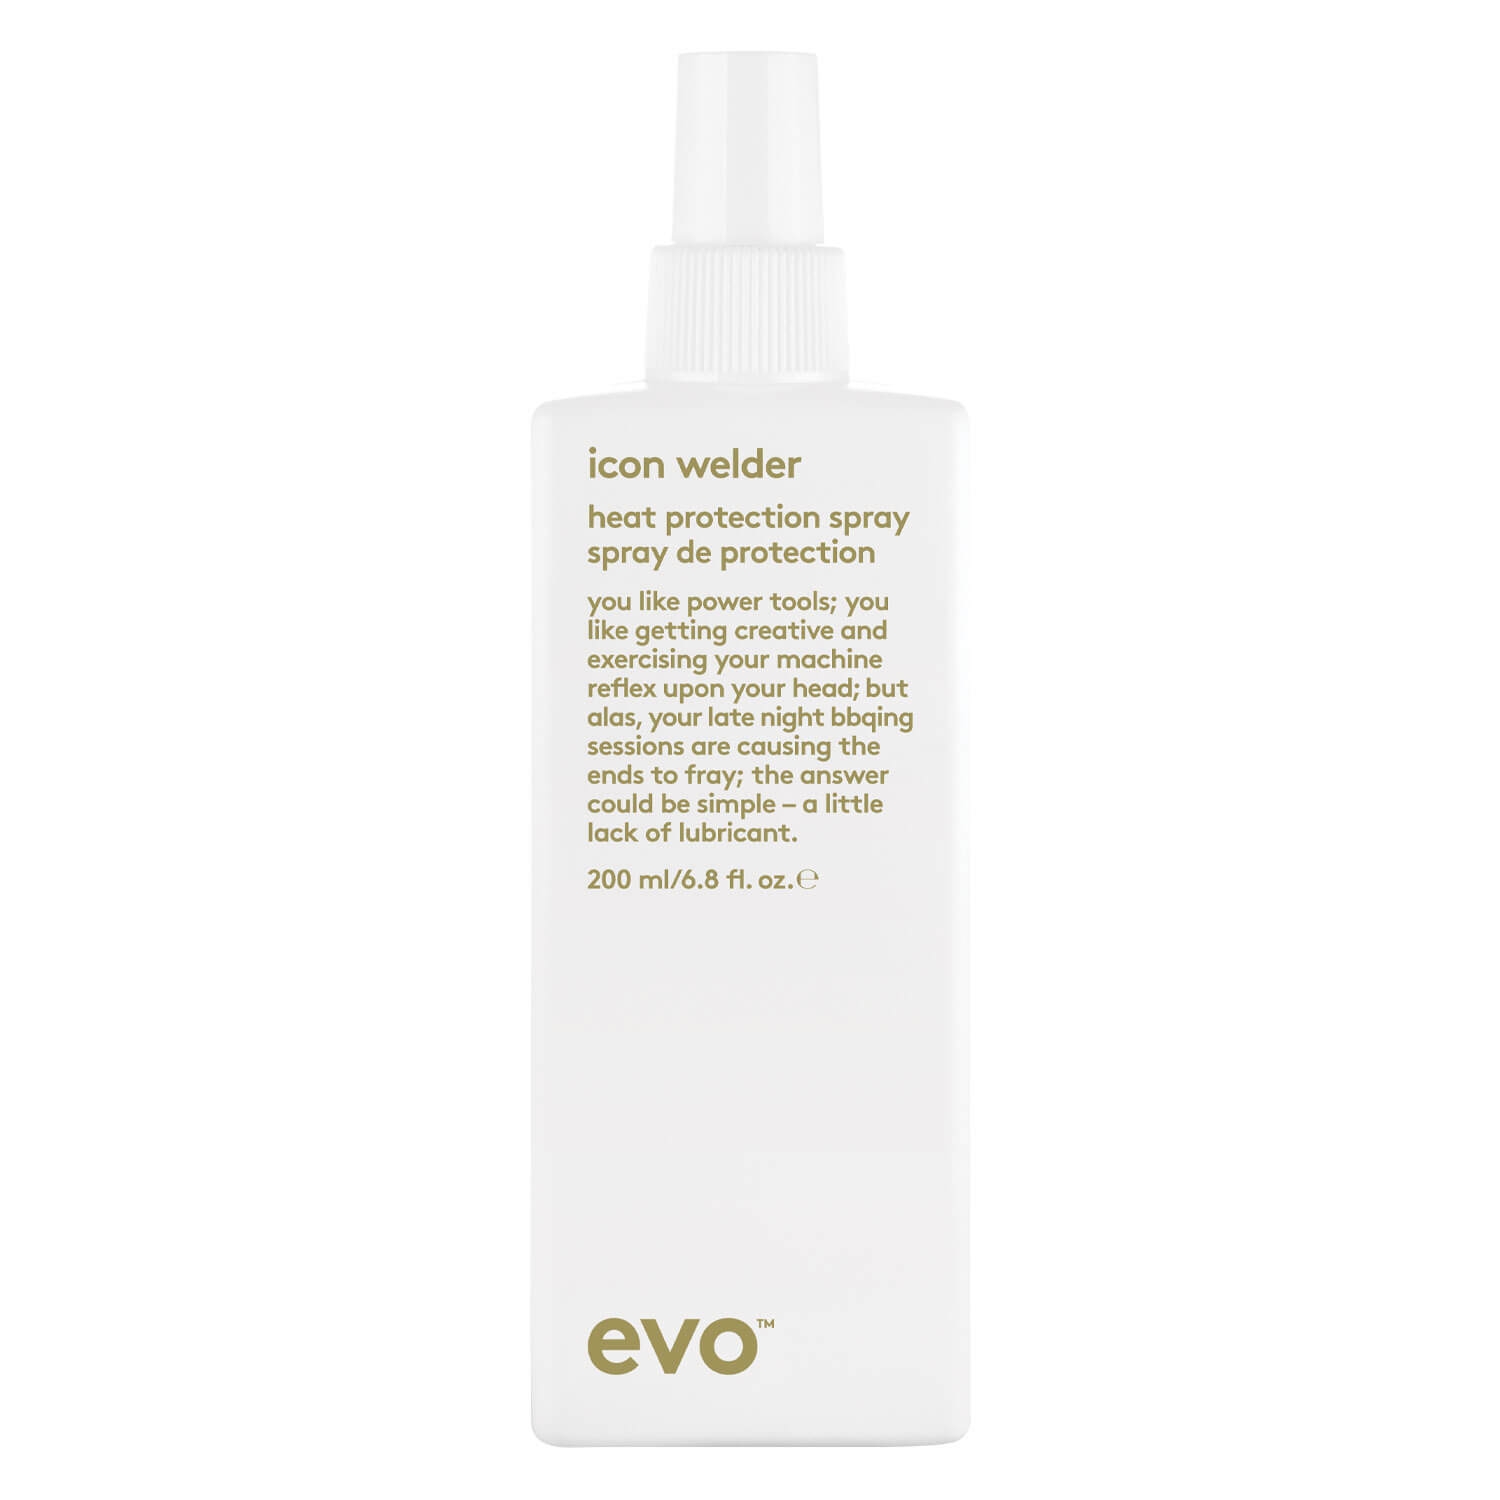 Product image from evo smooth - icon welder heat protection spray